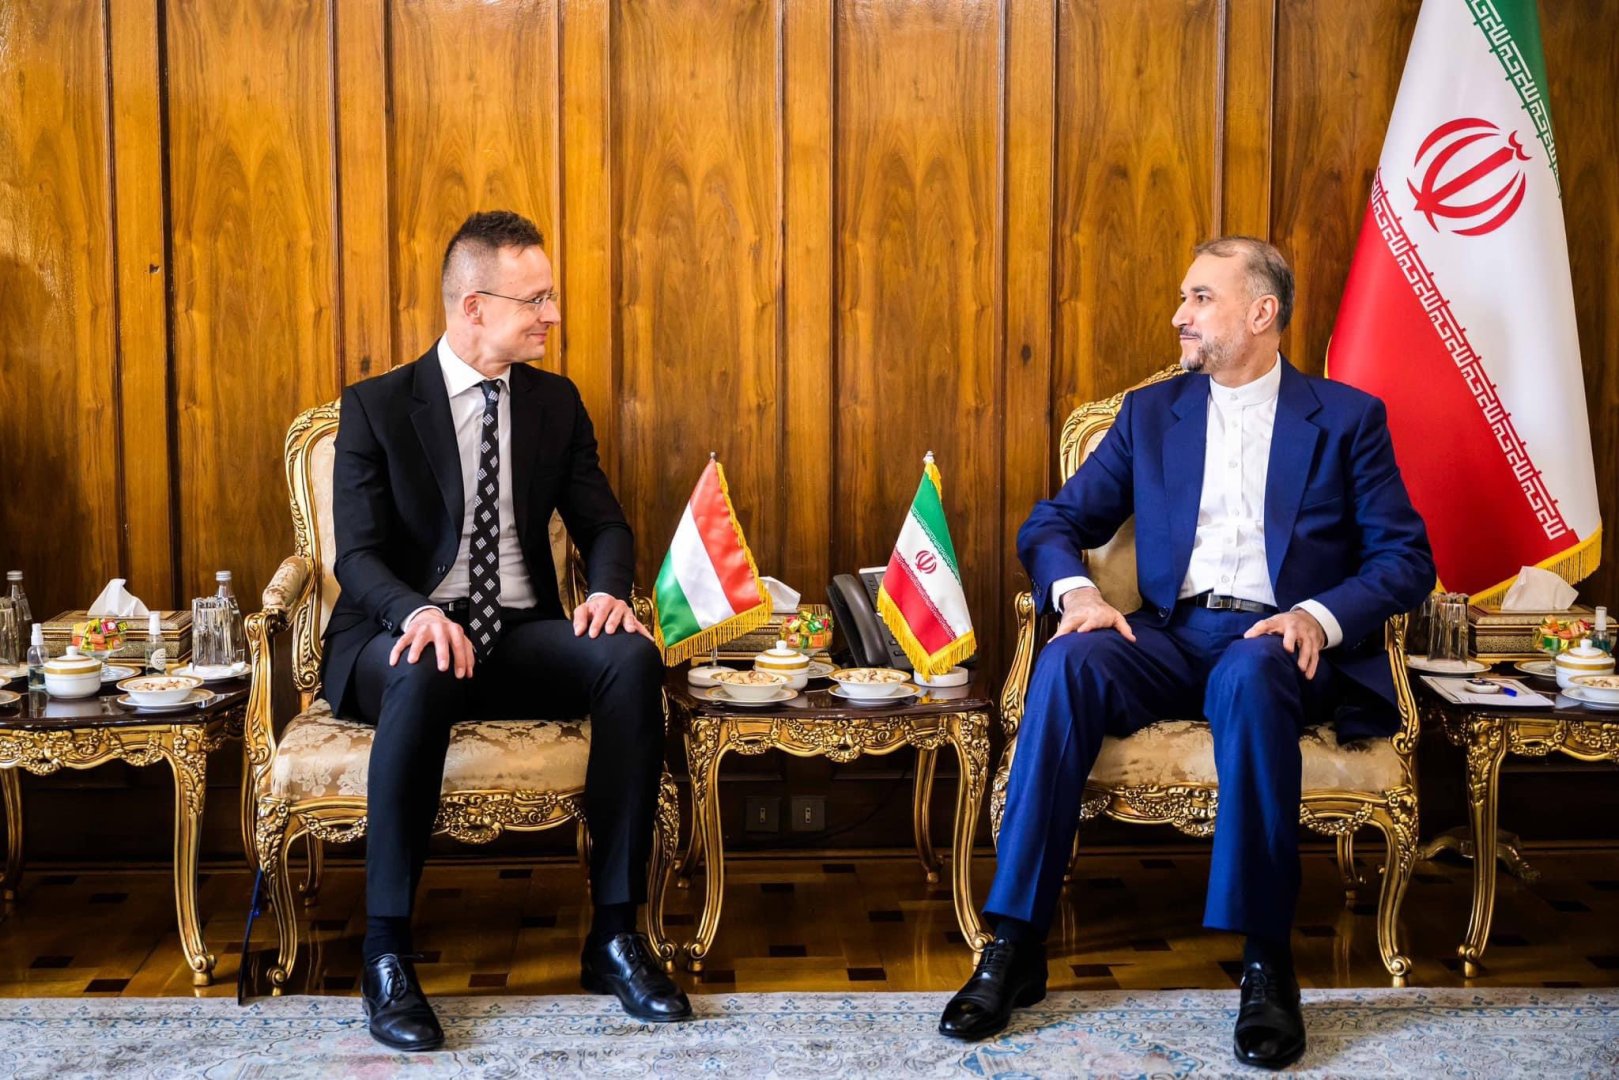 Hungarian FM's visit to Iran aims de-escalation in Middle East - Secretary of State